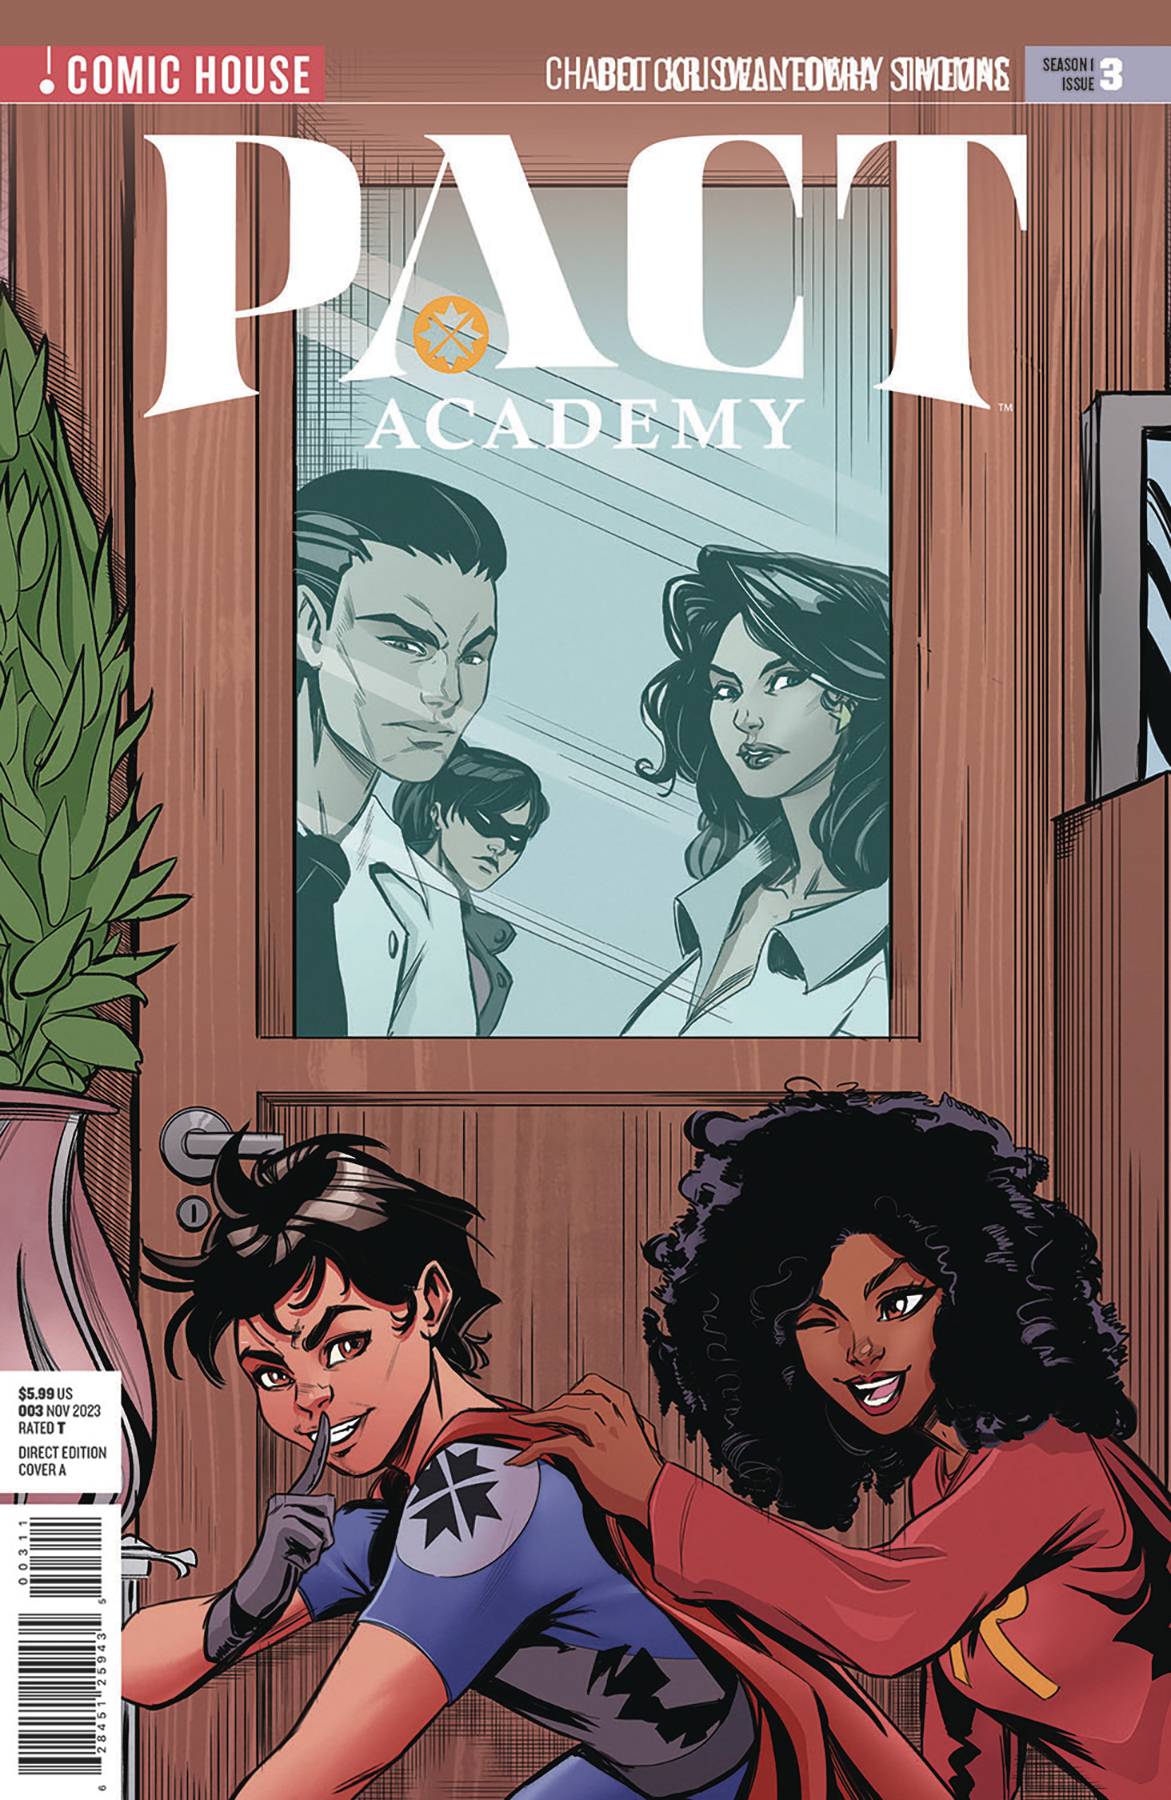 PACT ACADEMY #3 (OF 4)